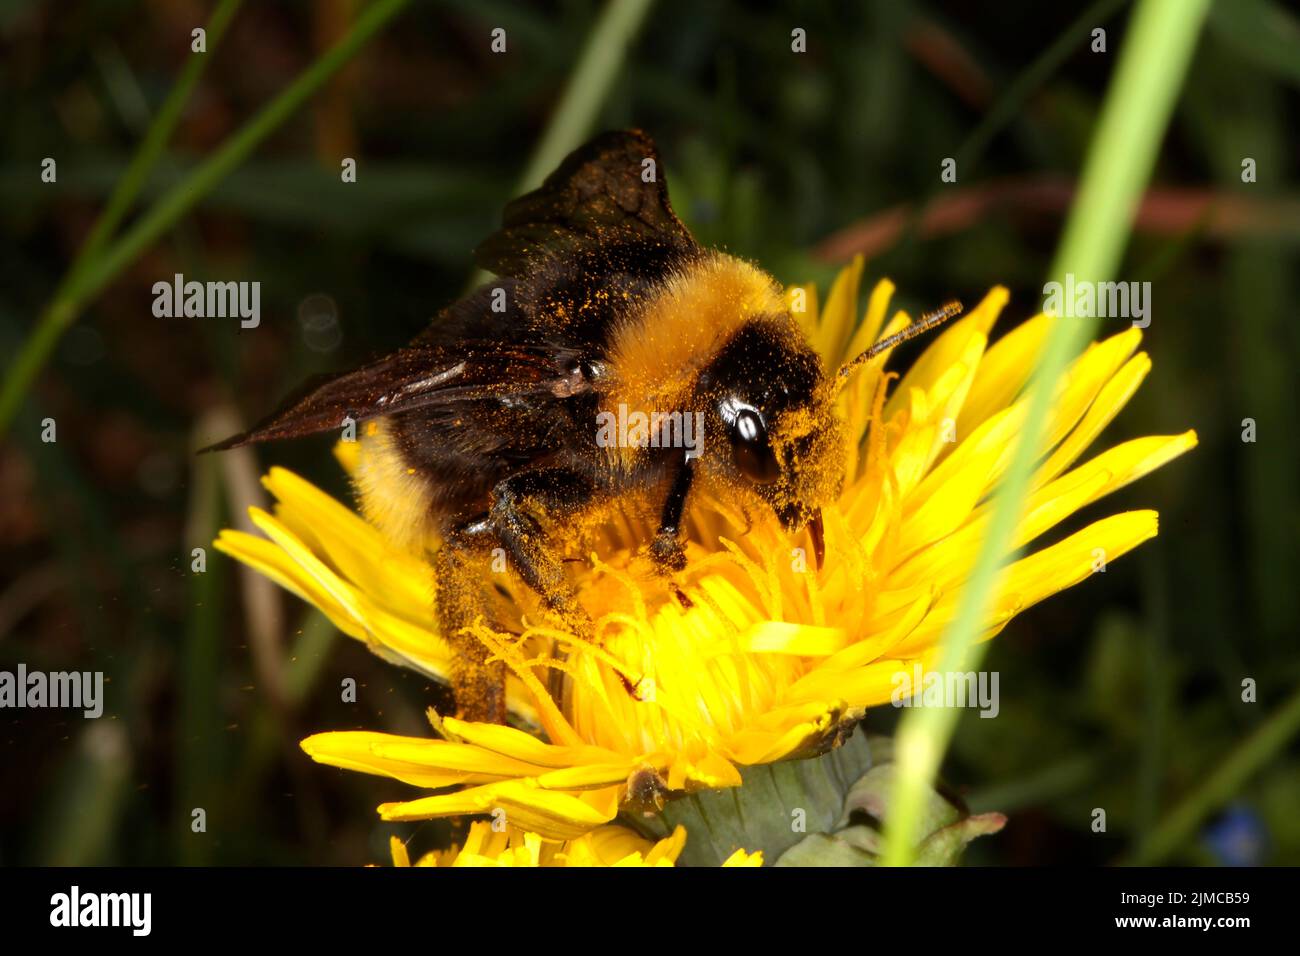 Bumblebee, Insect, Blossom, Nectar, Thuringia, Germany, Europe Stock Photo